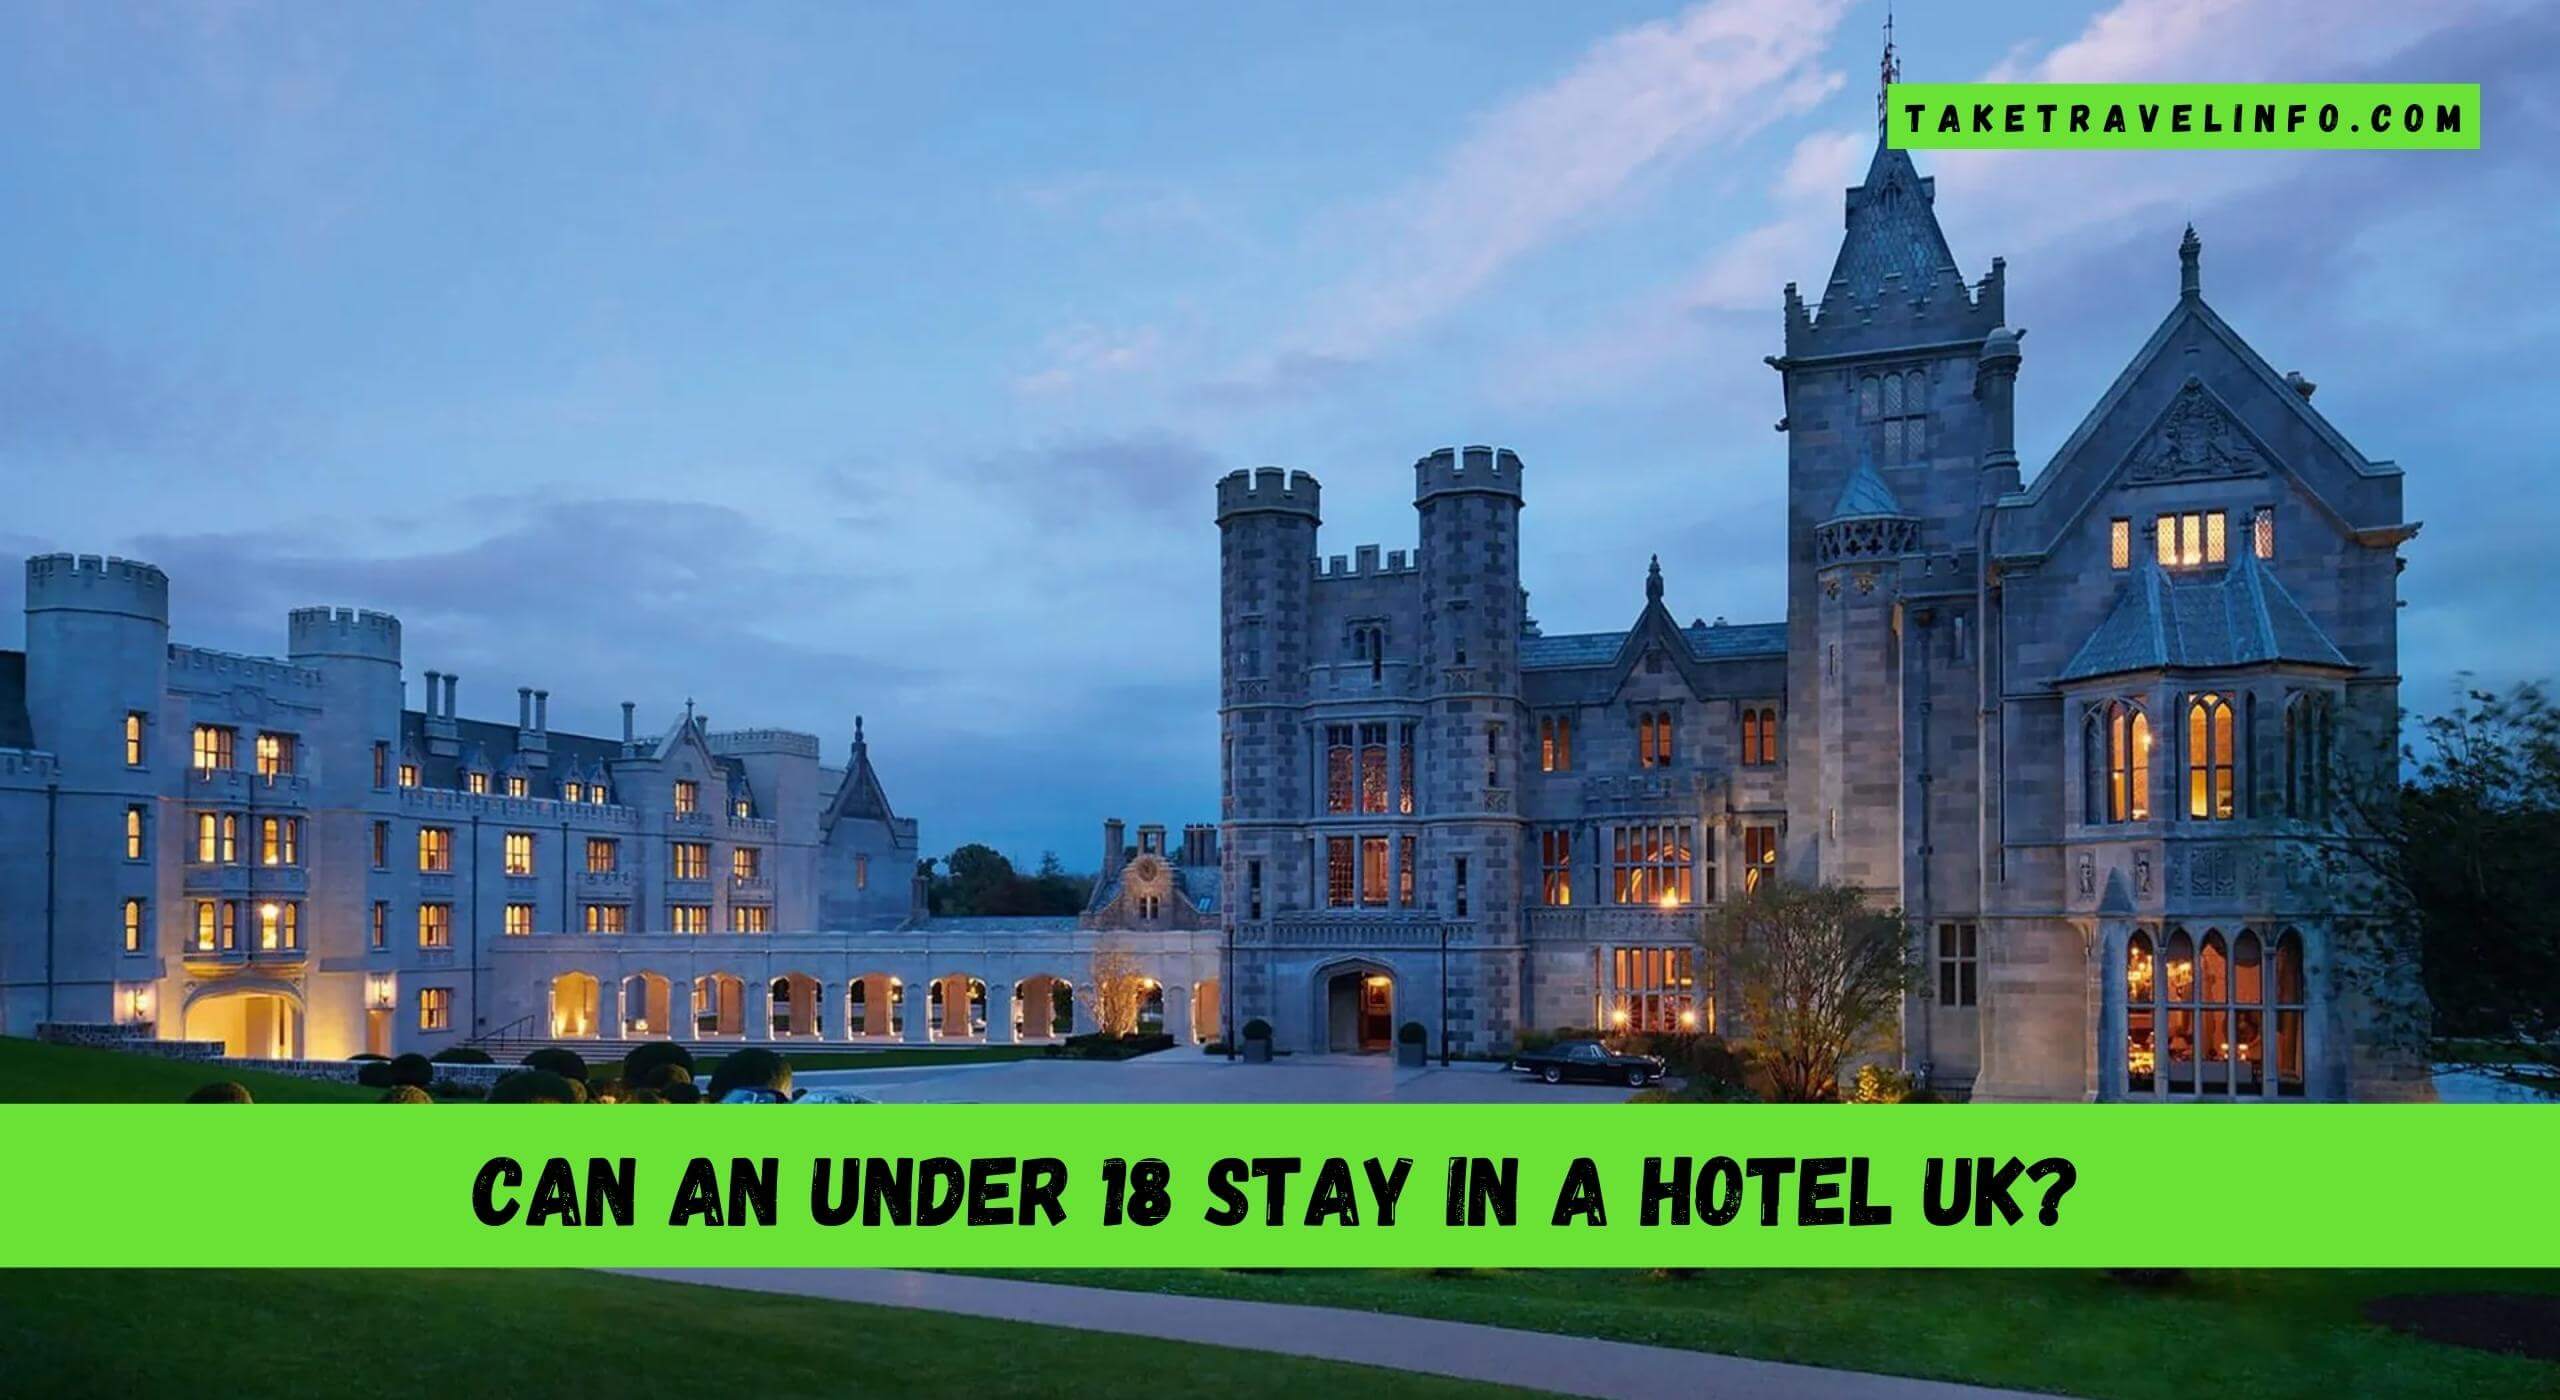 Can An Under 18 Stay In A Hotel UK?